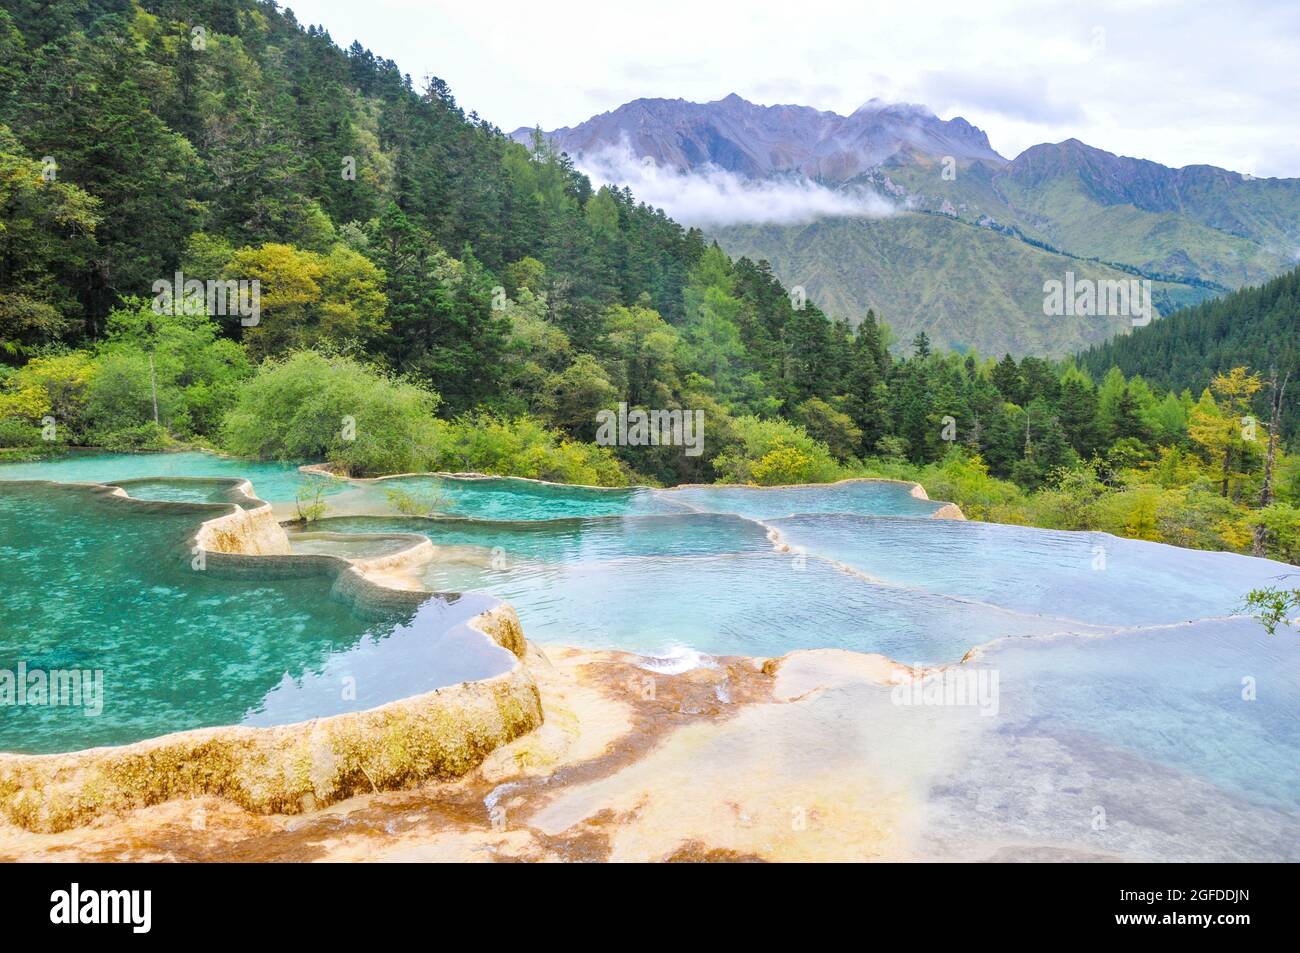 Huanglong national park in Songpan county Sichuan province China Stock Photo